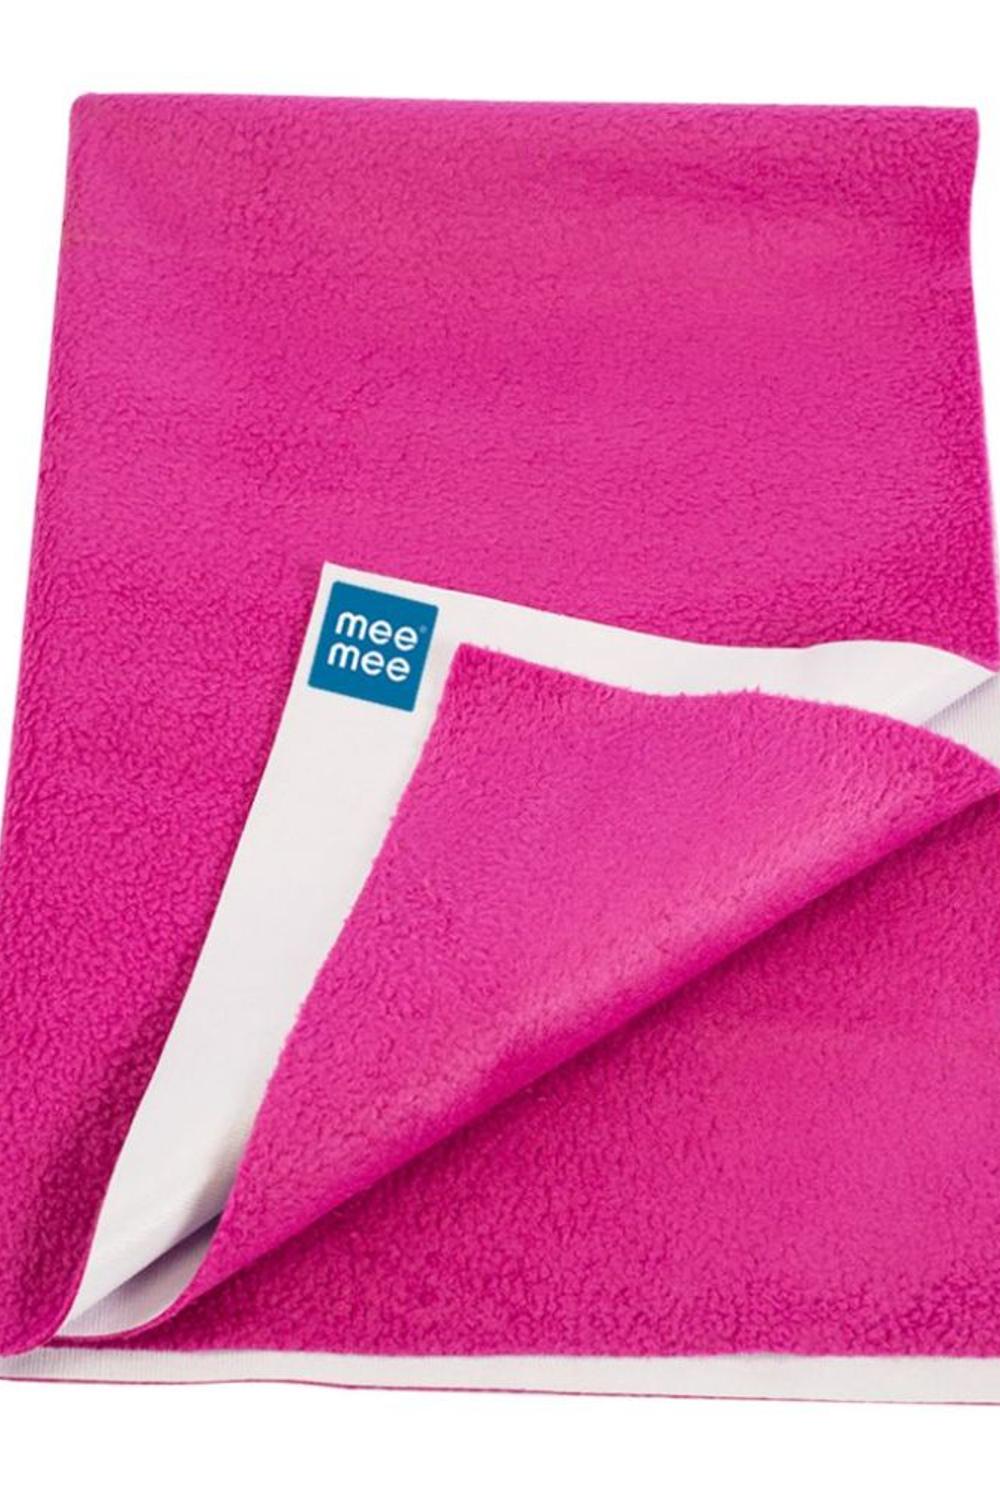 Mee Mee Pink Breathable and Total Dry Sheet Protector Mat (Medium)